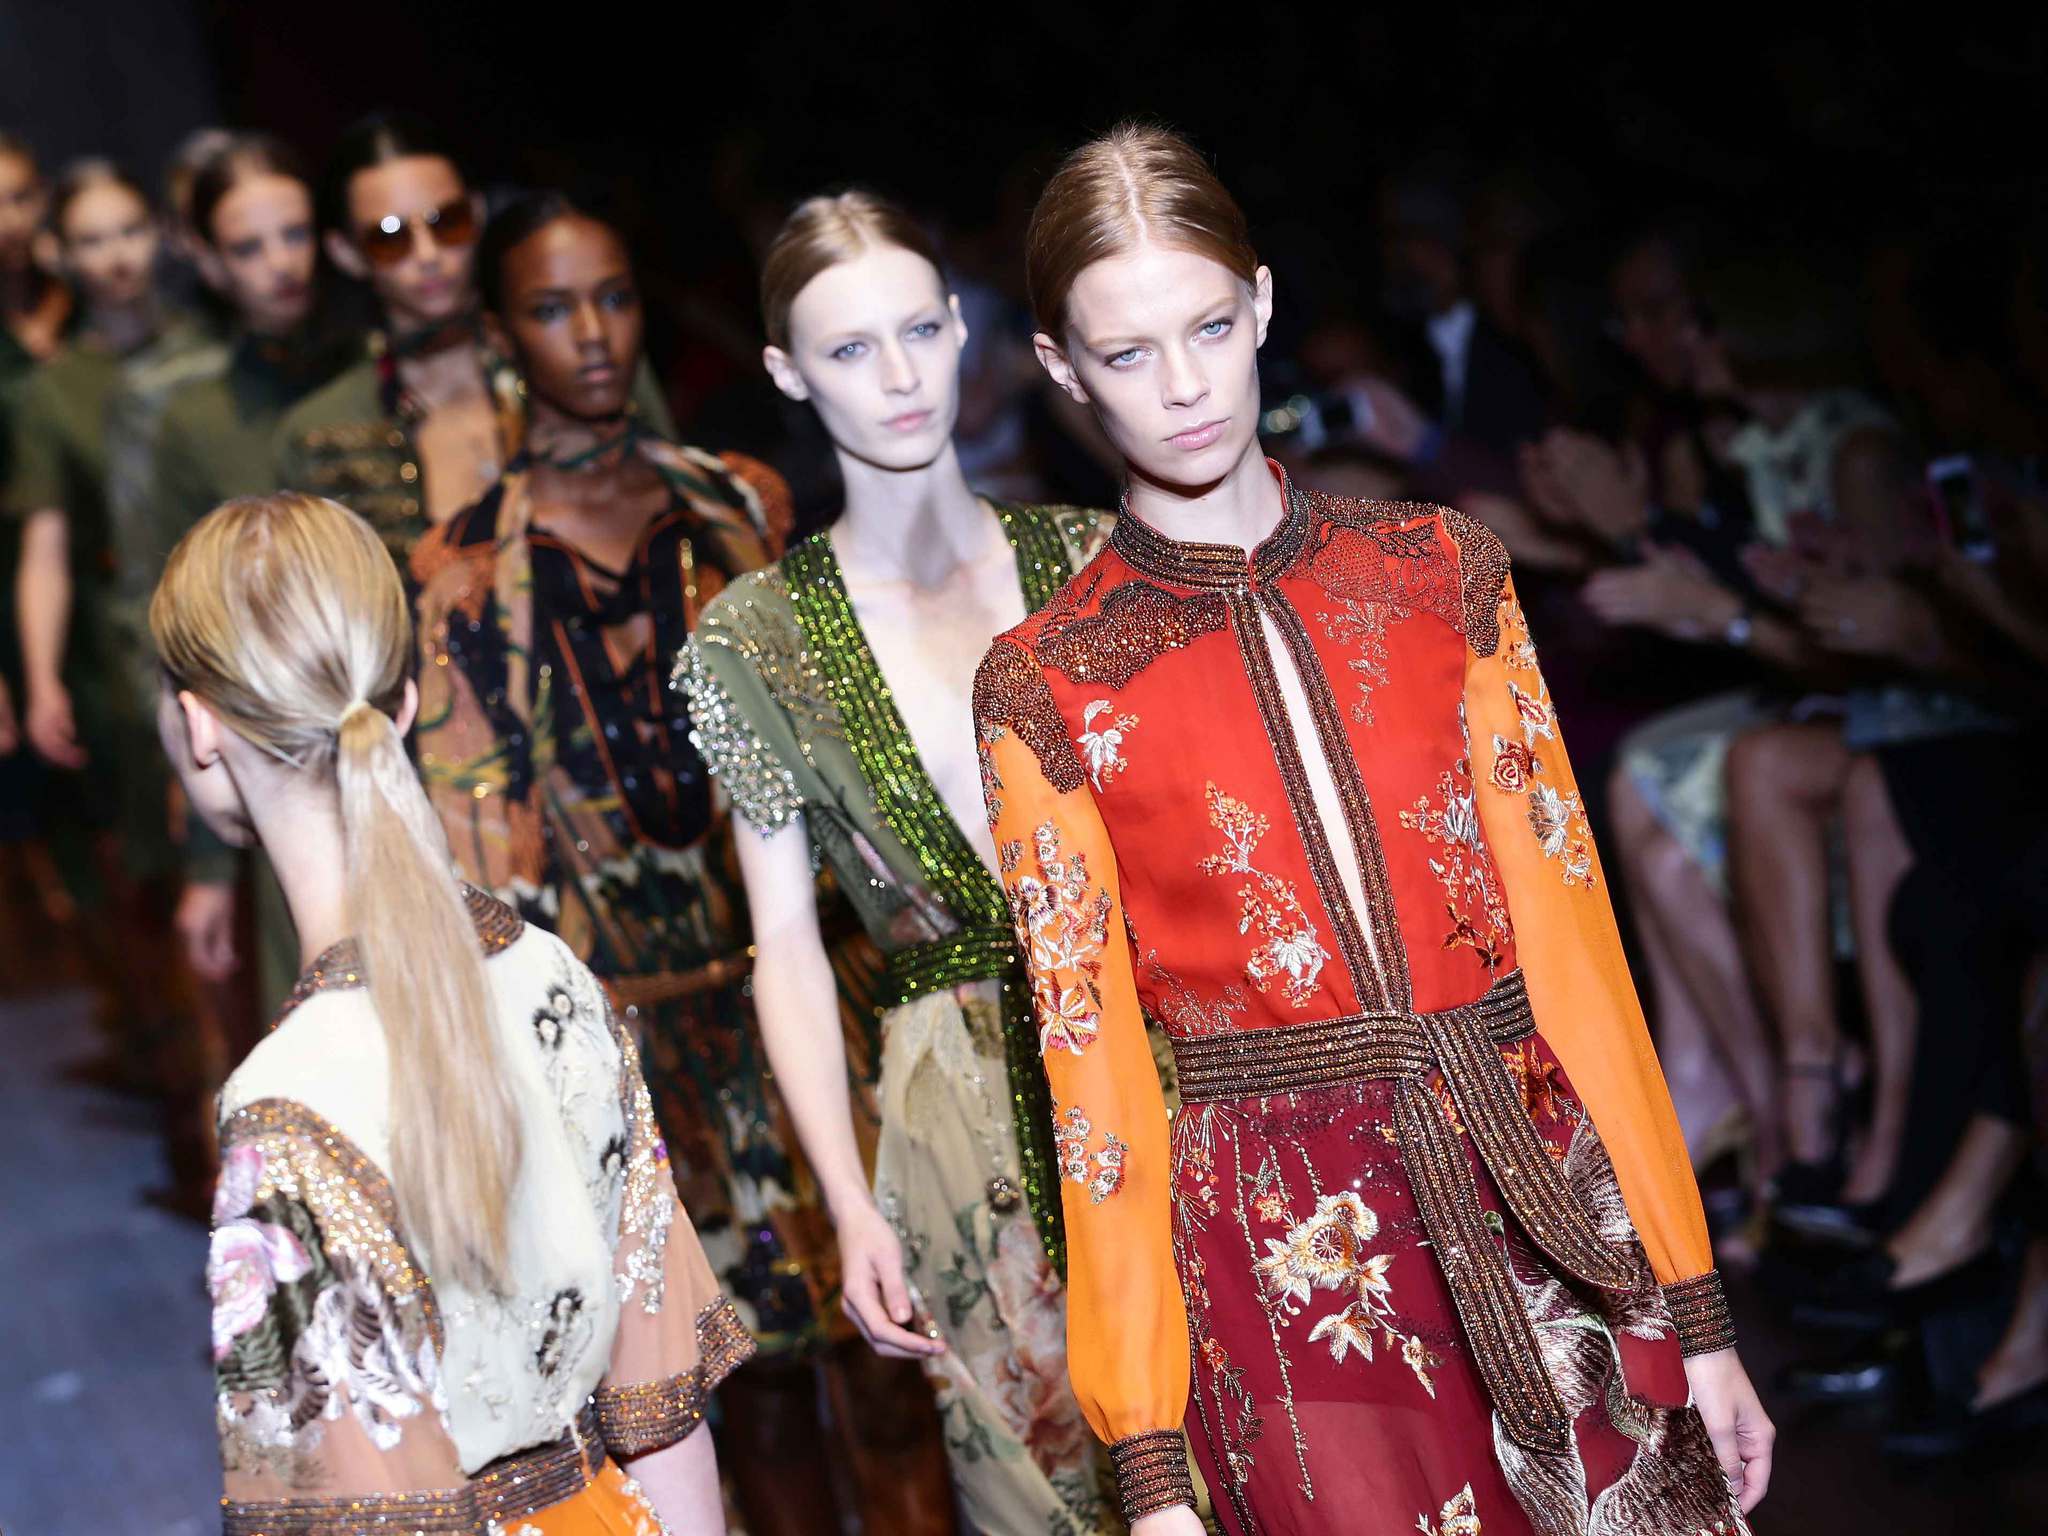 The finale at the Gucci spring/summer 2015 show